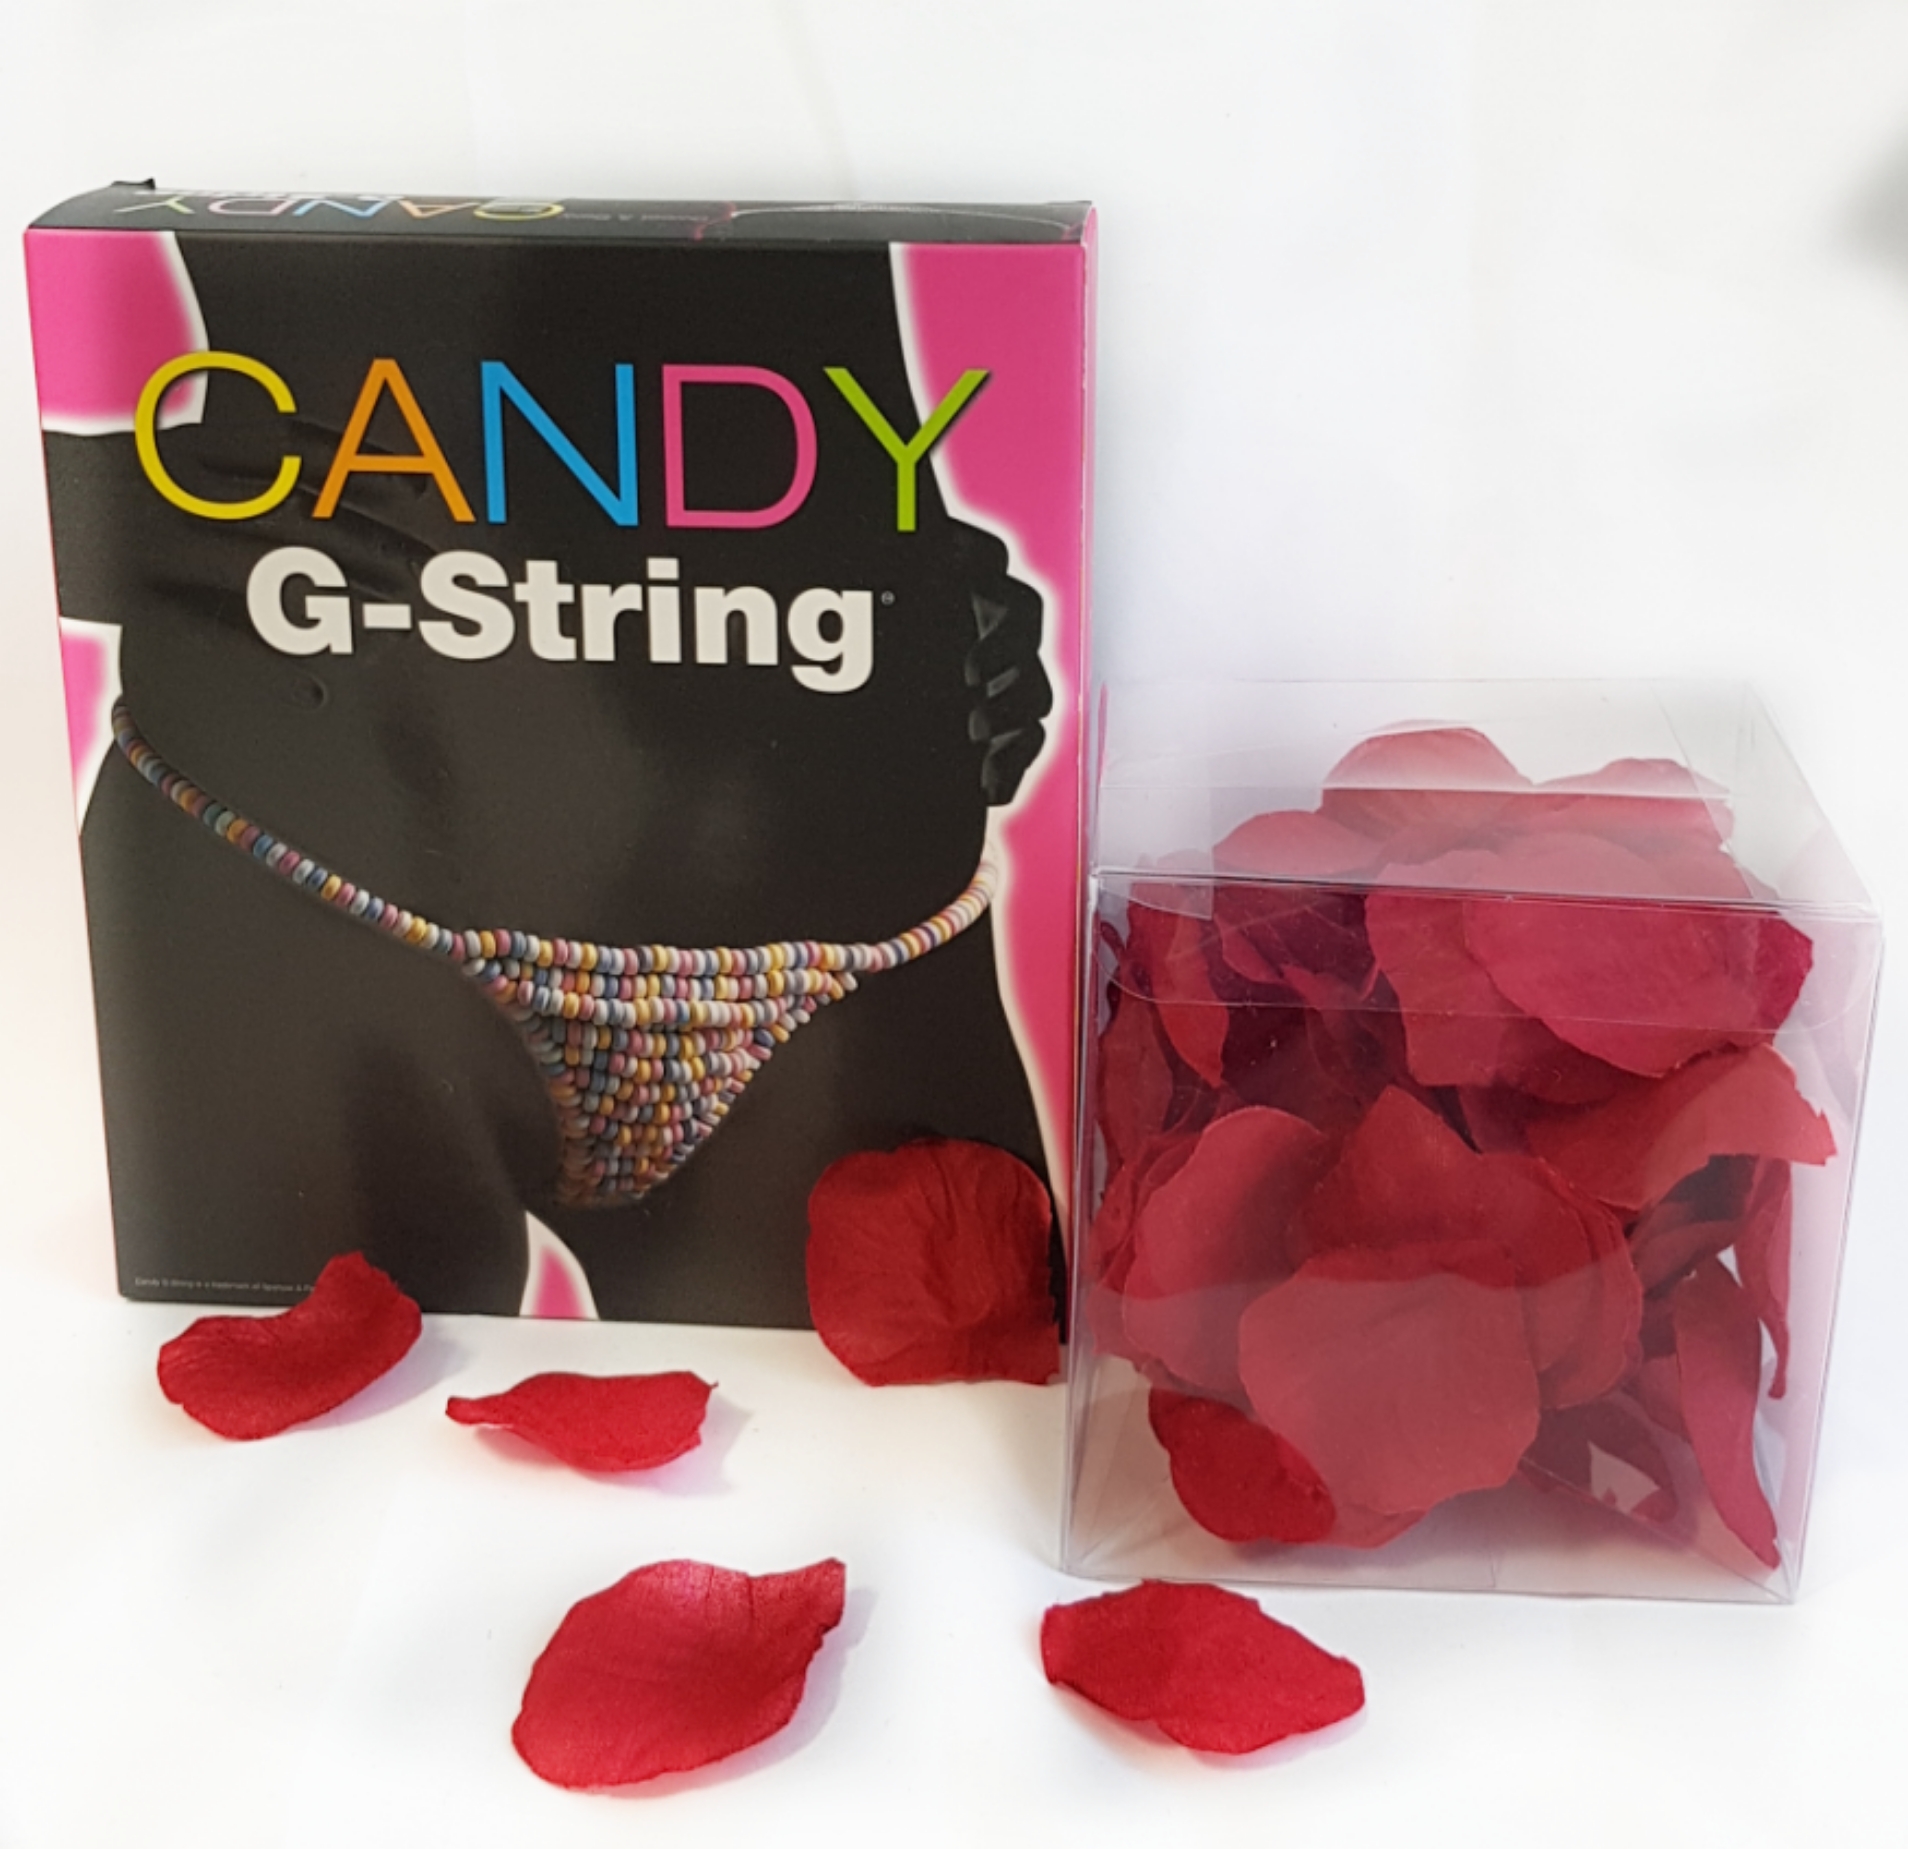 Candy G-String & Rose Petals